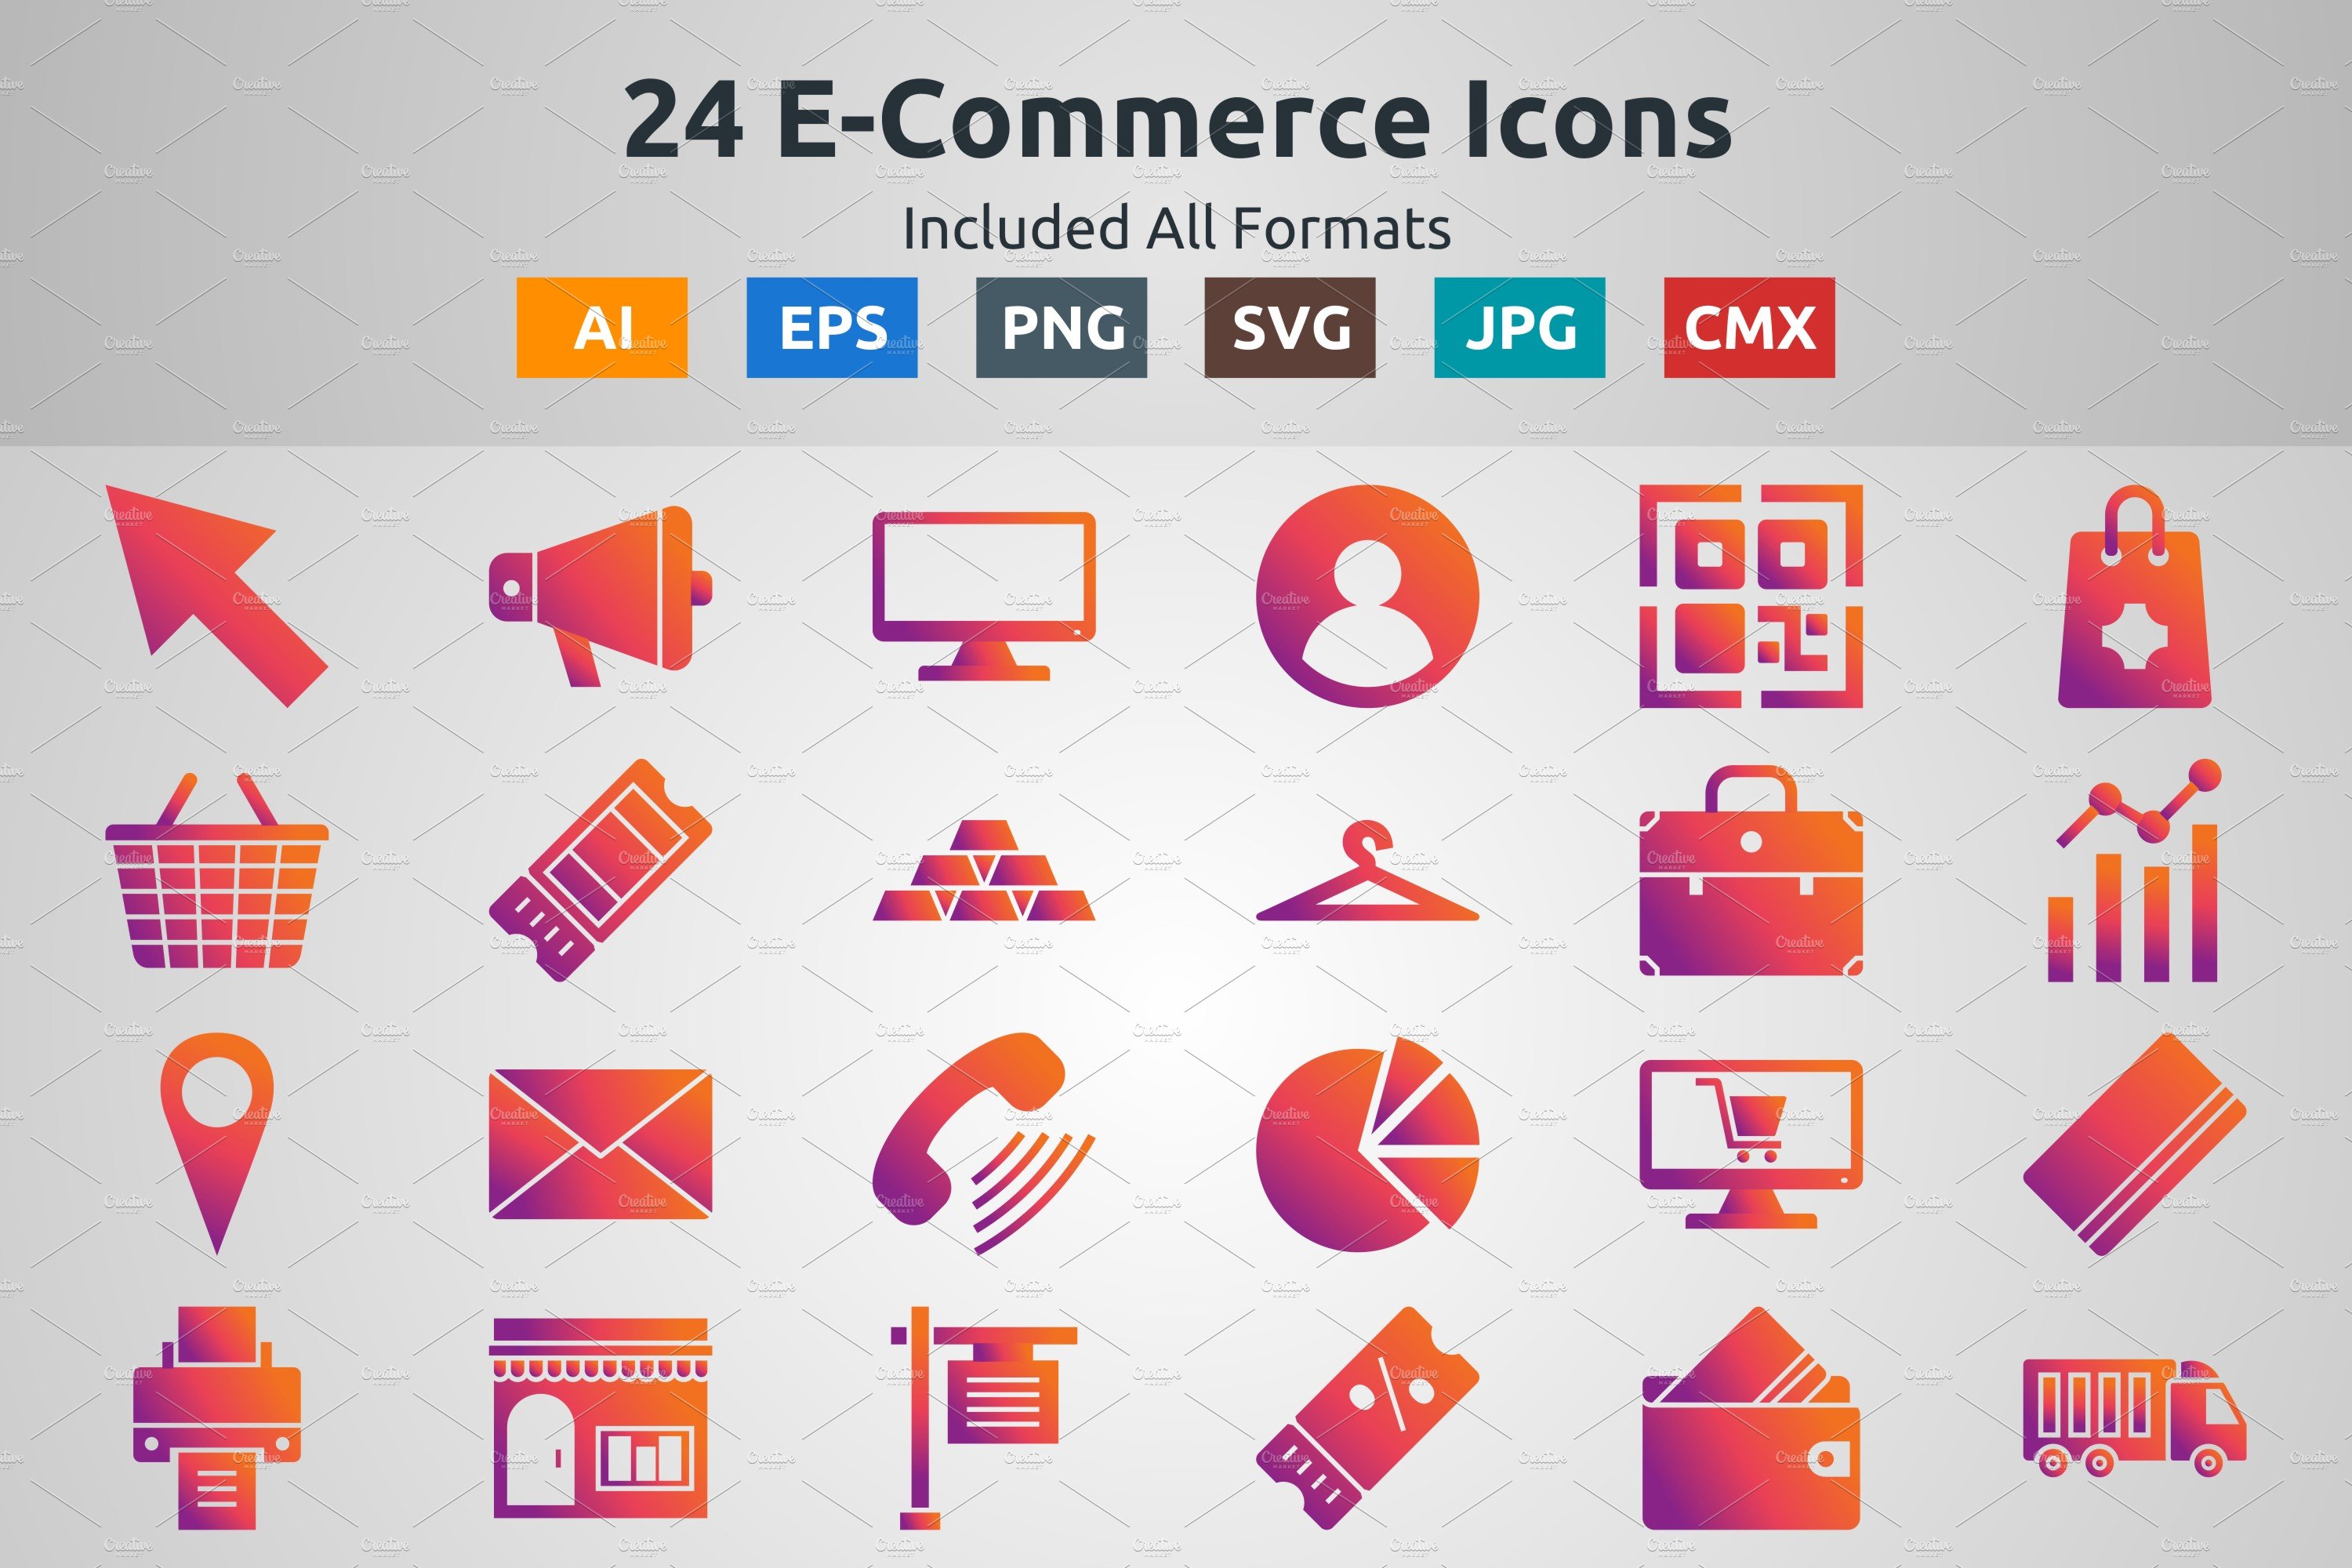 Glyph Gradient Icon of Commerce Icon cover image.